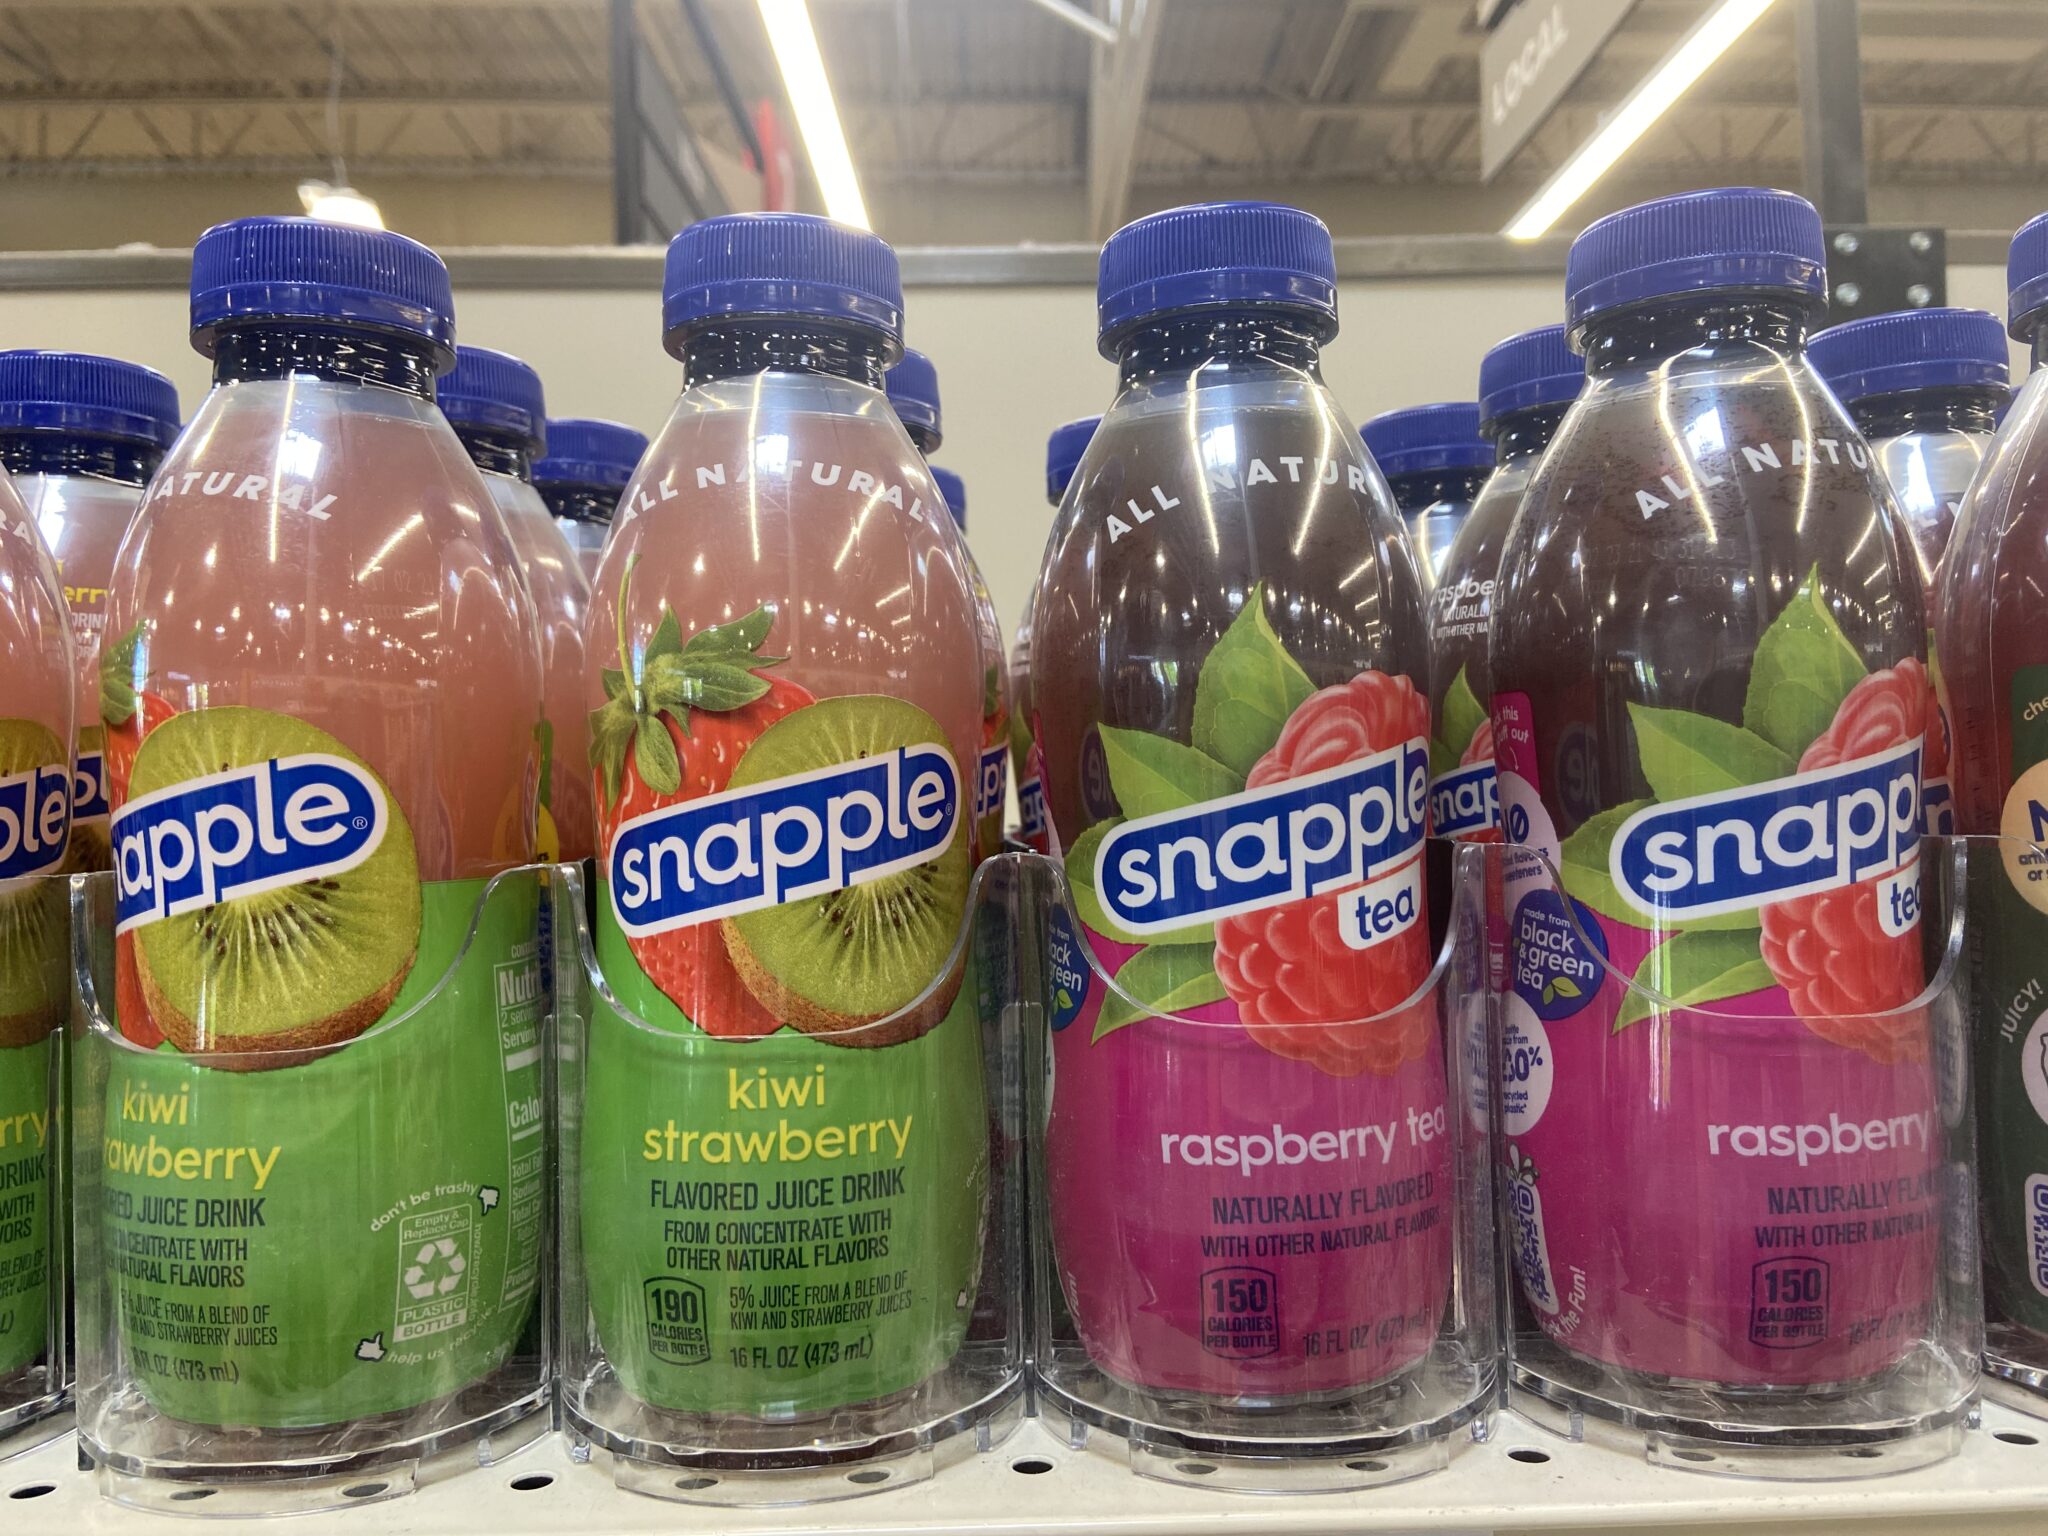 Giant: Snapple Drinks JUST $0.94 Each Starting 4/28